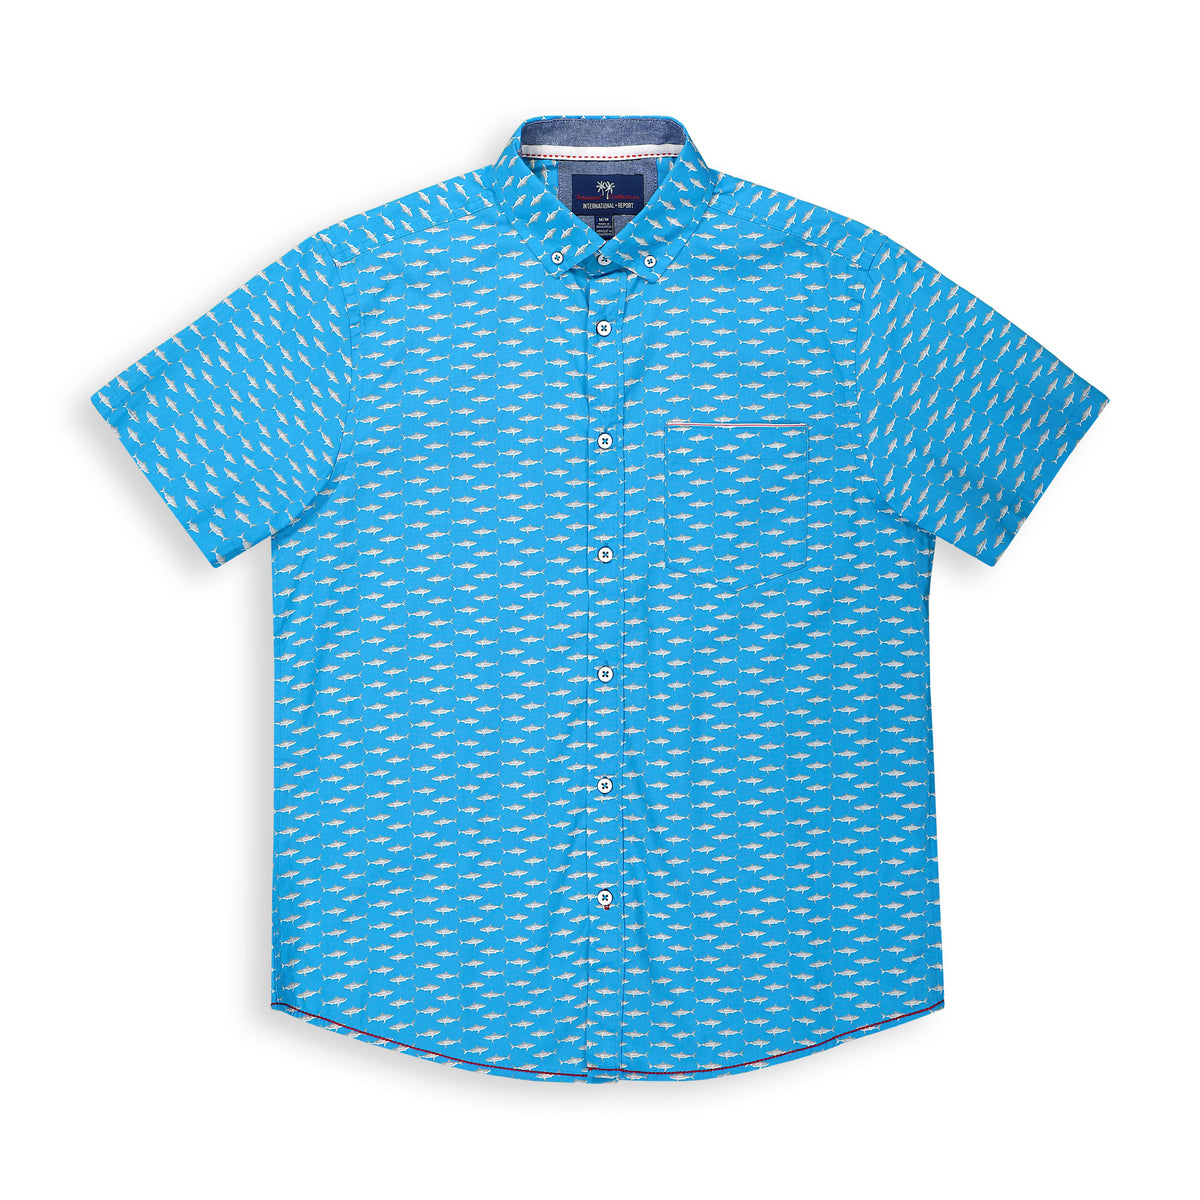 Front View of Short Sleeve Shirt with Shark Print in Blue